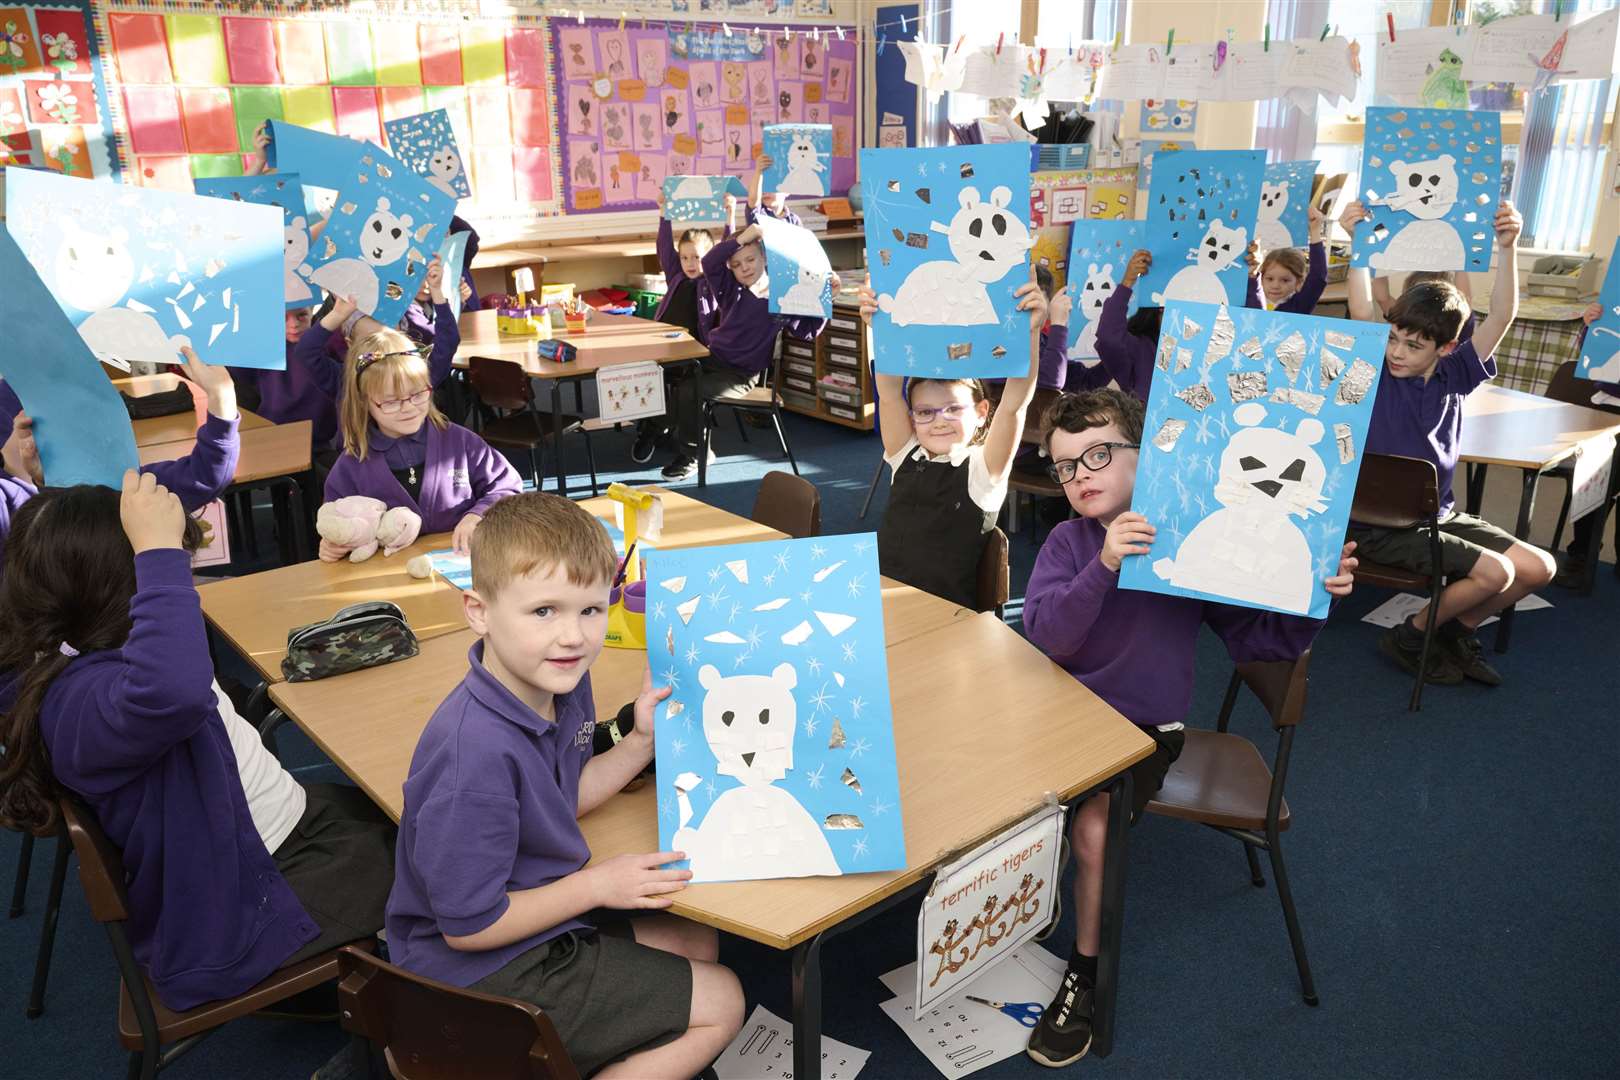 Primary pupils taking part in the Highland One World and the Open University in Scotland's Art for Action project.